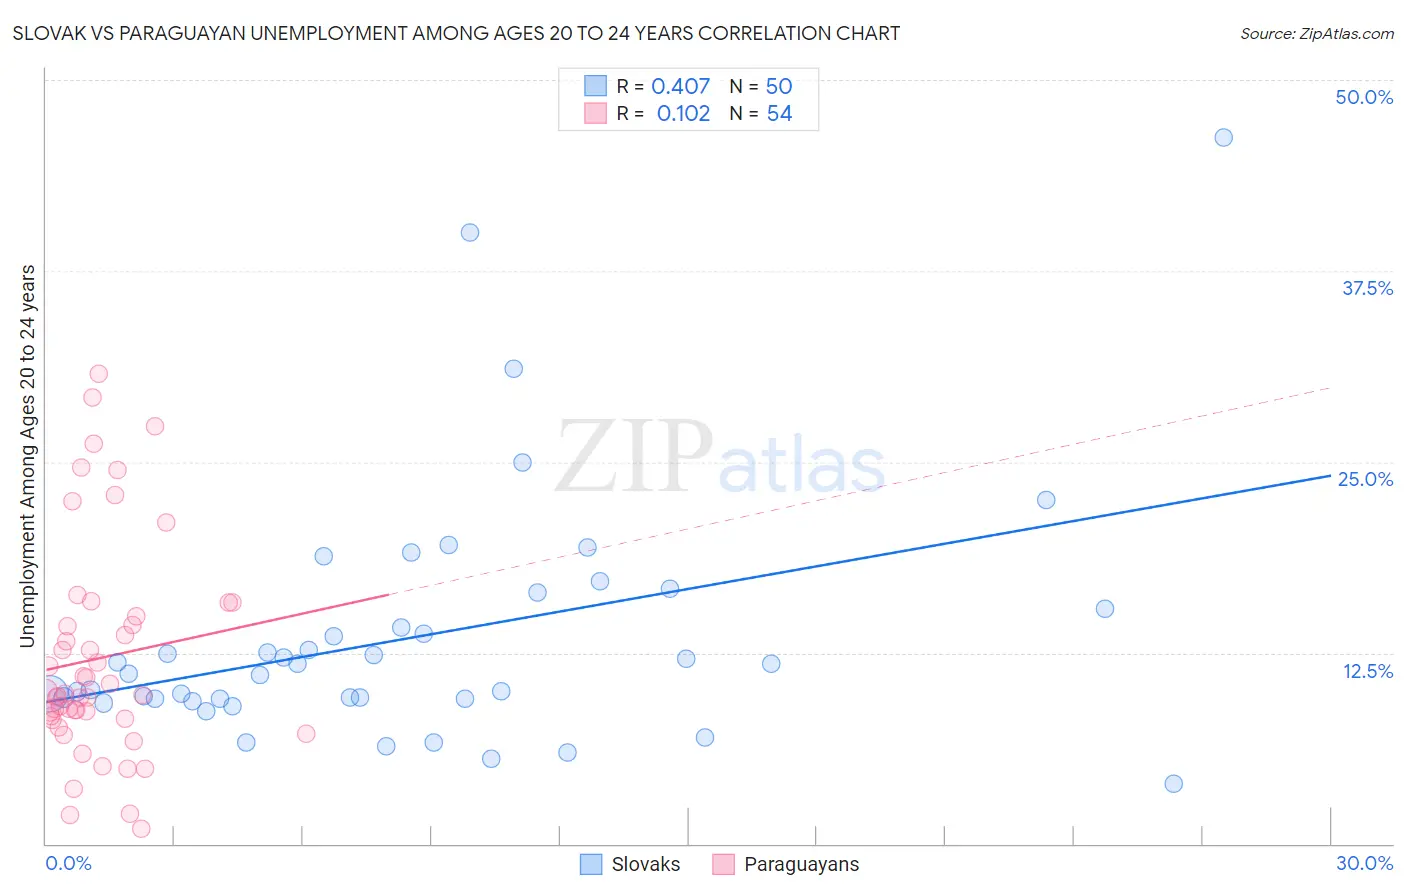 Slovak vs Paraguayan Unemployment Among Ages 20 to 24 years